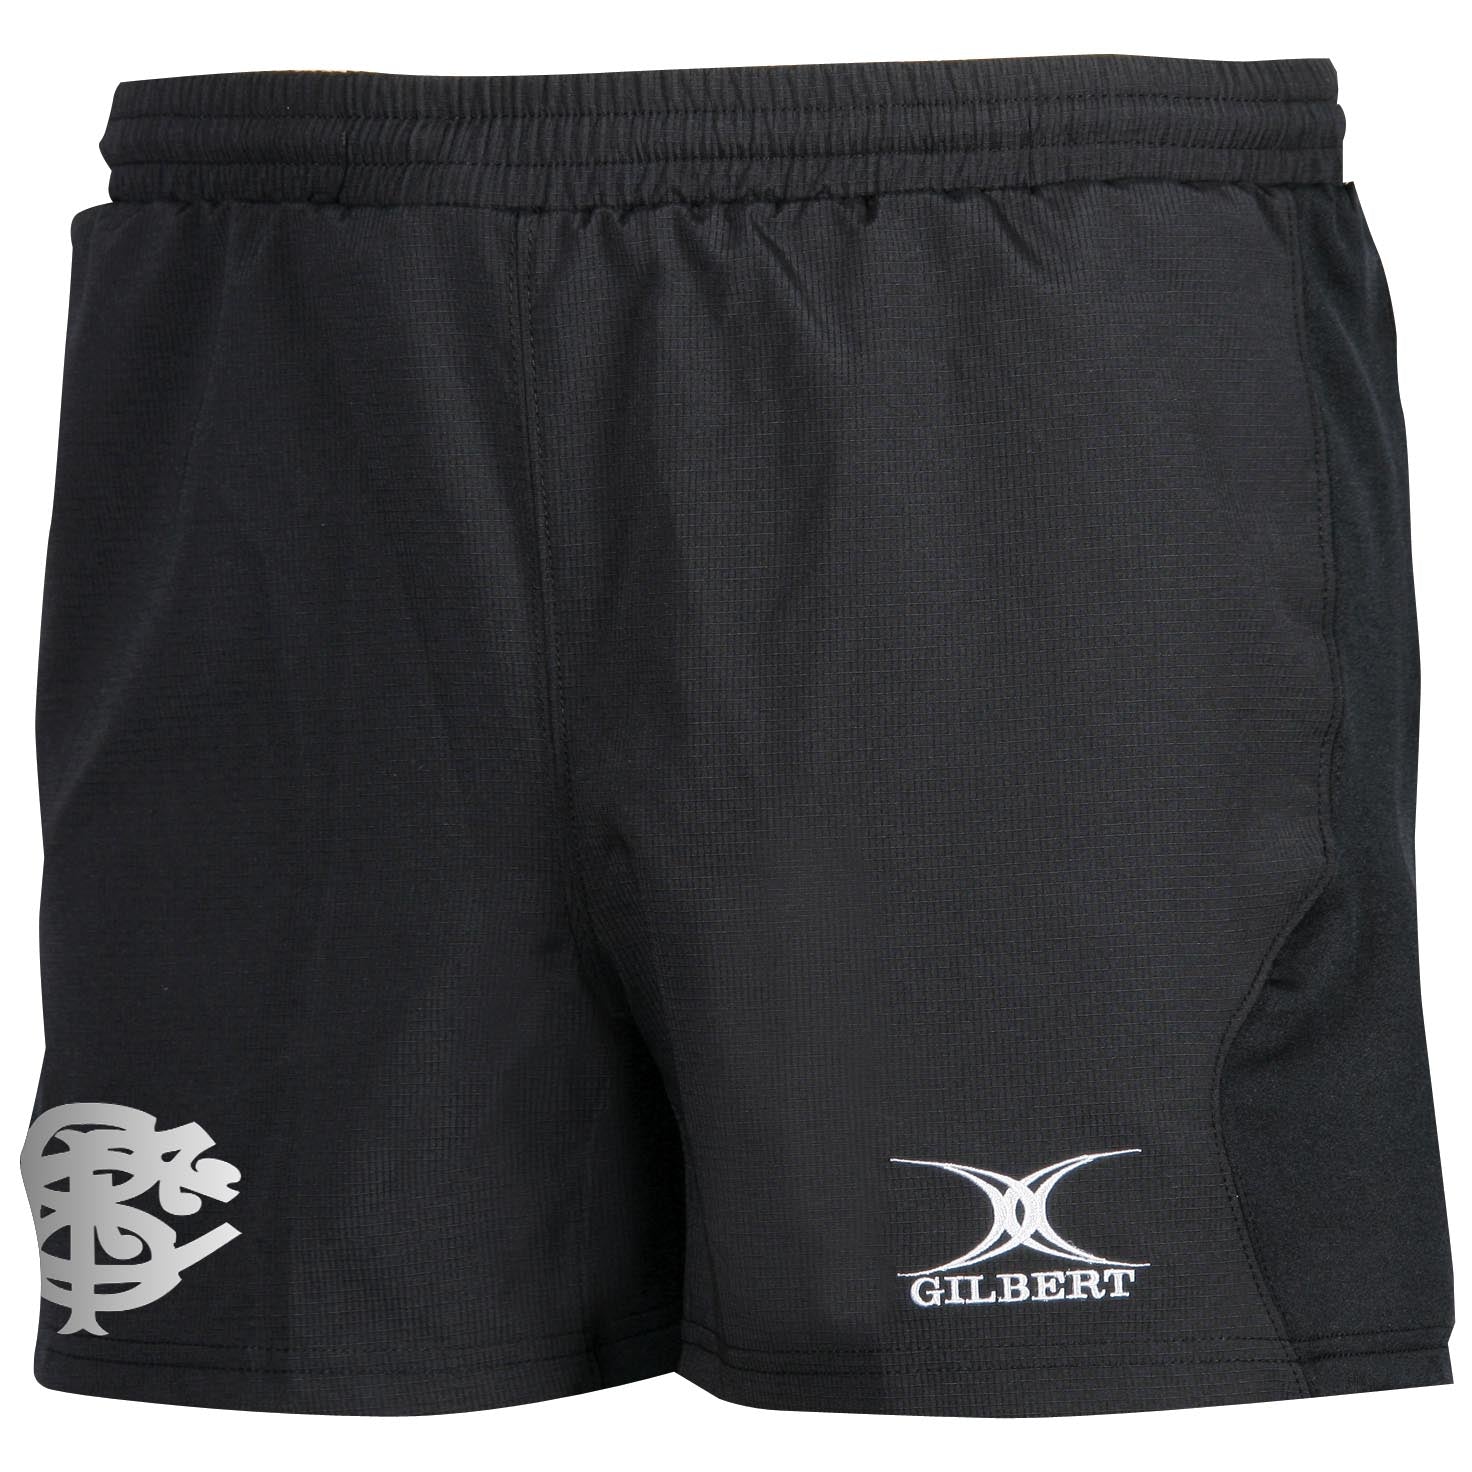 Barbarian FC Adult's Match Short